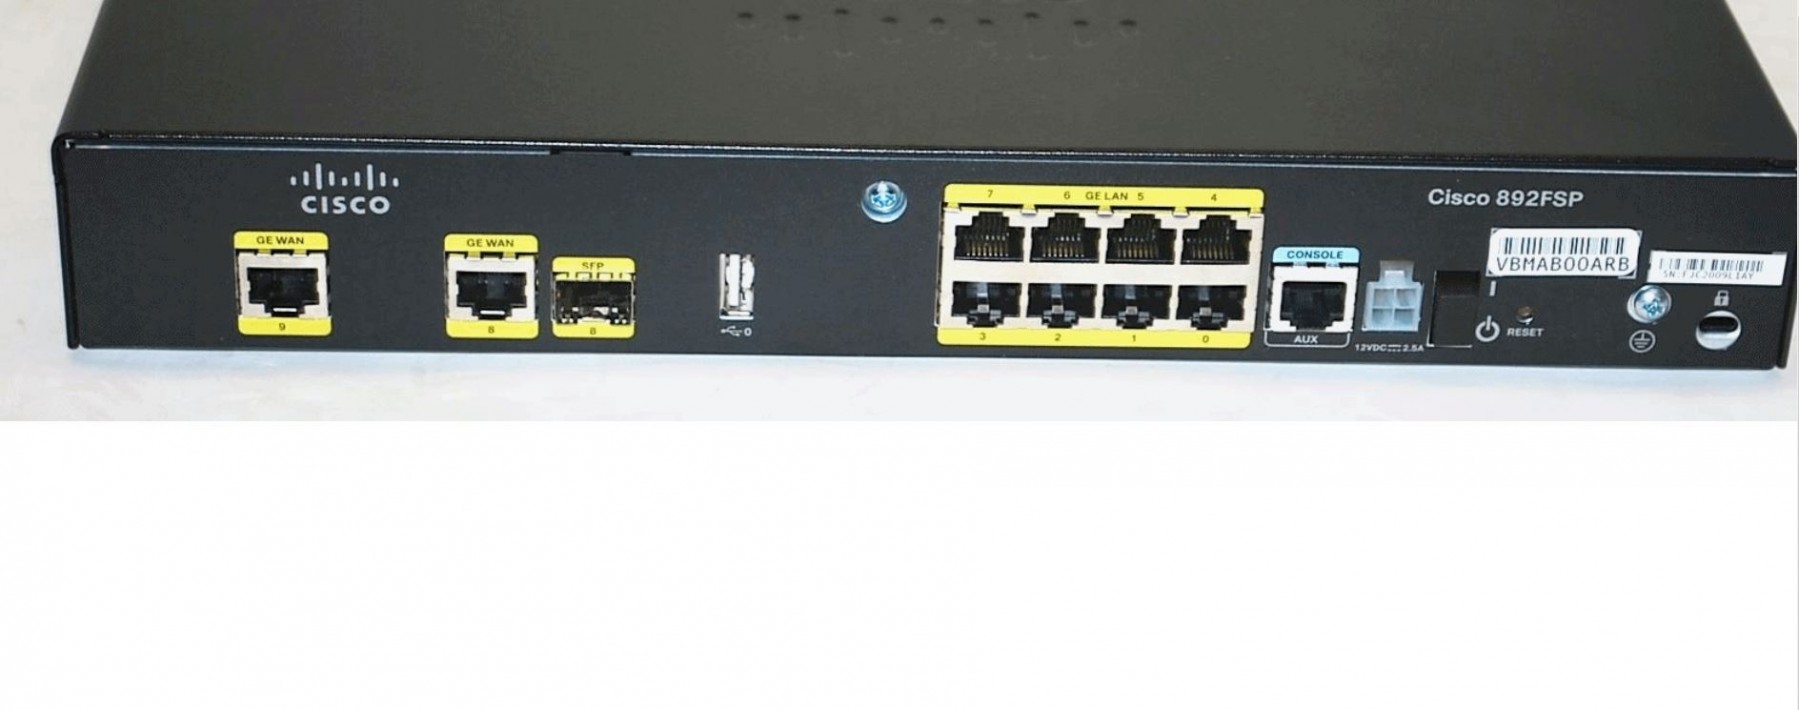 Intuïtie kolonie Justitie Cisco 890 Gigabit Ethernet Sec. Router - ROUTERS/SWITCHES - NETWORKING